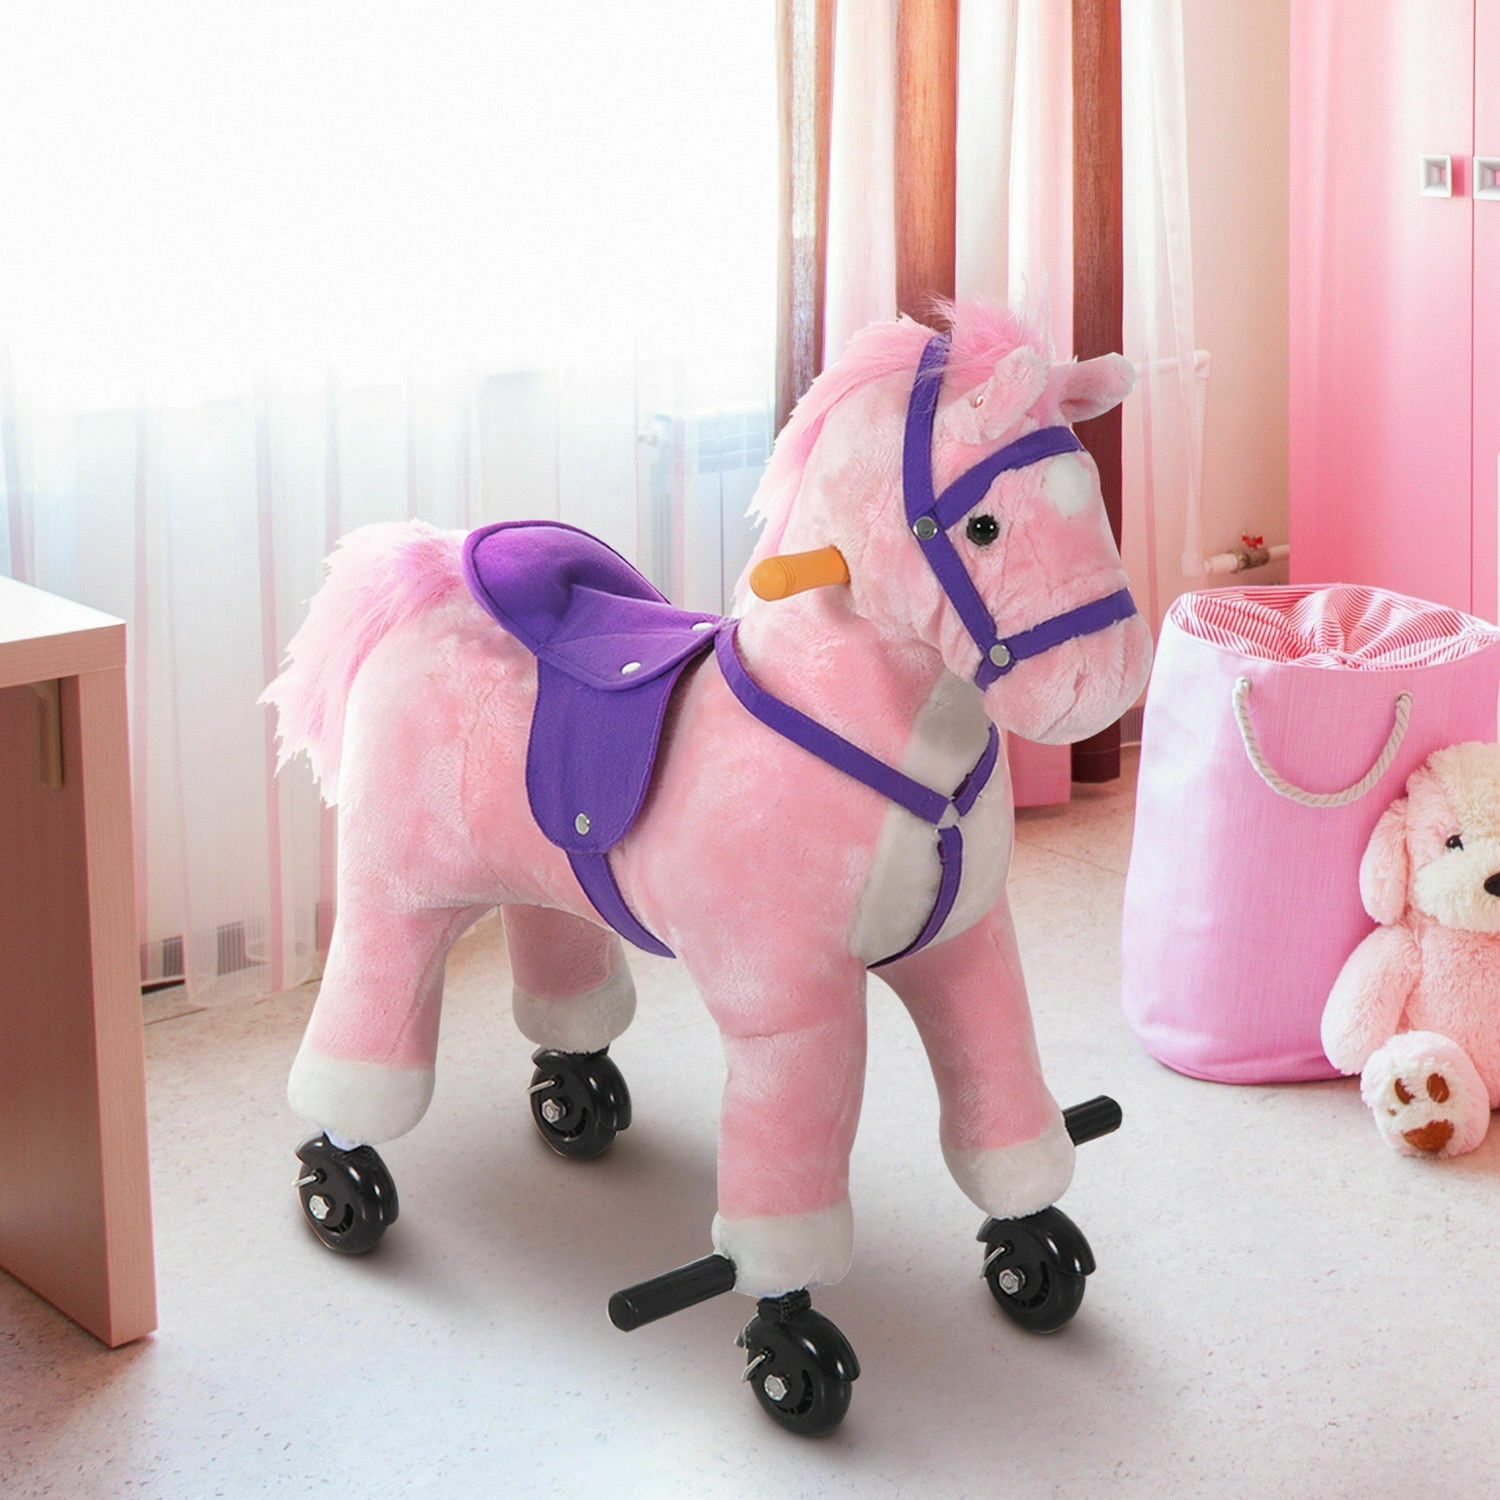 4-in-1 Rocking Horse Kids Gift Cute Walking Ride On Baby Toy w/Neigh Sound Pink 